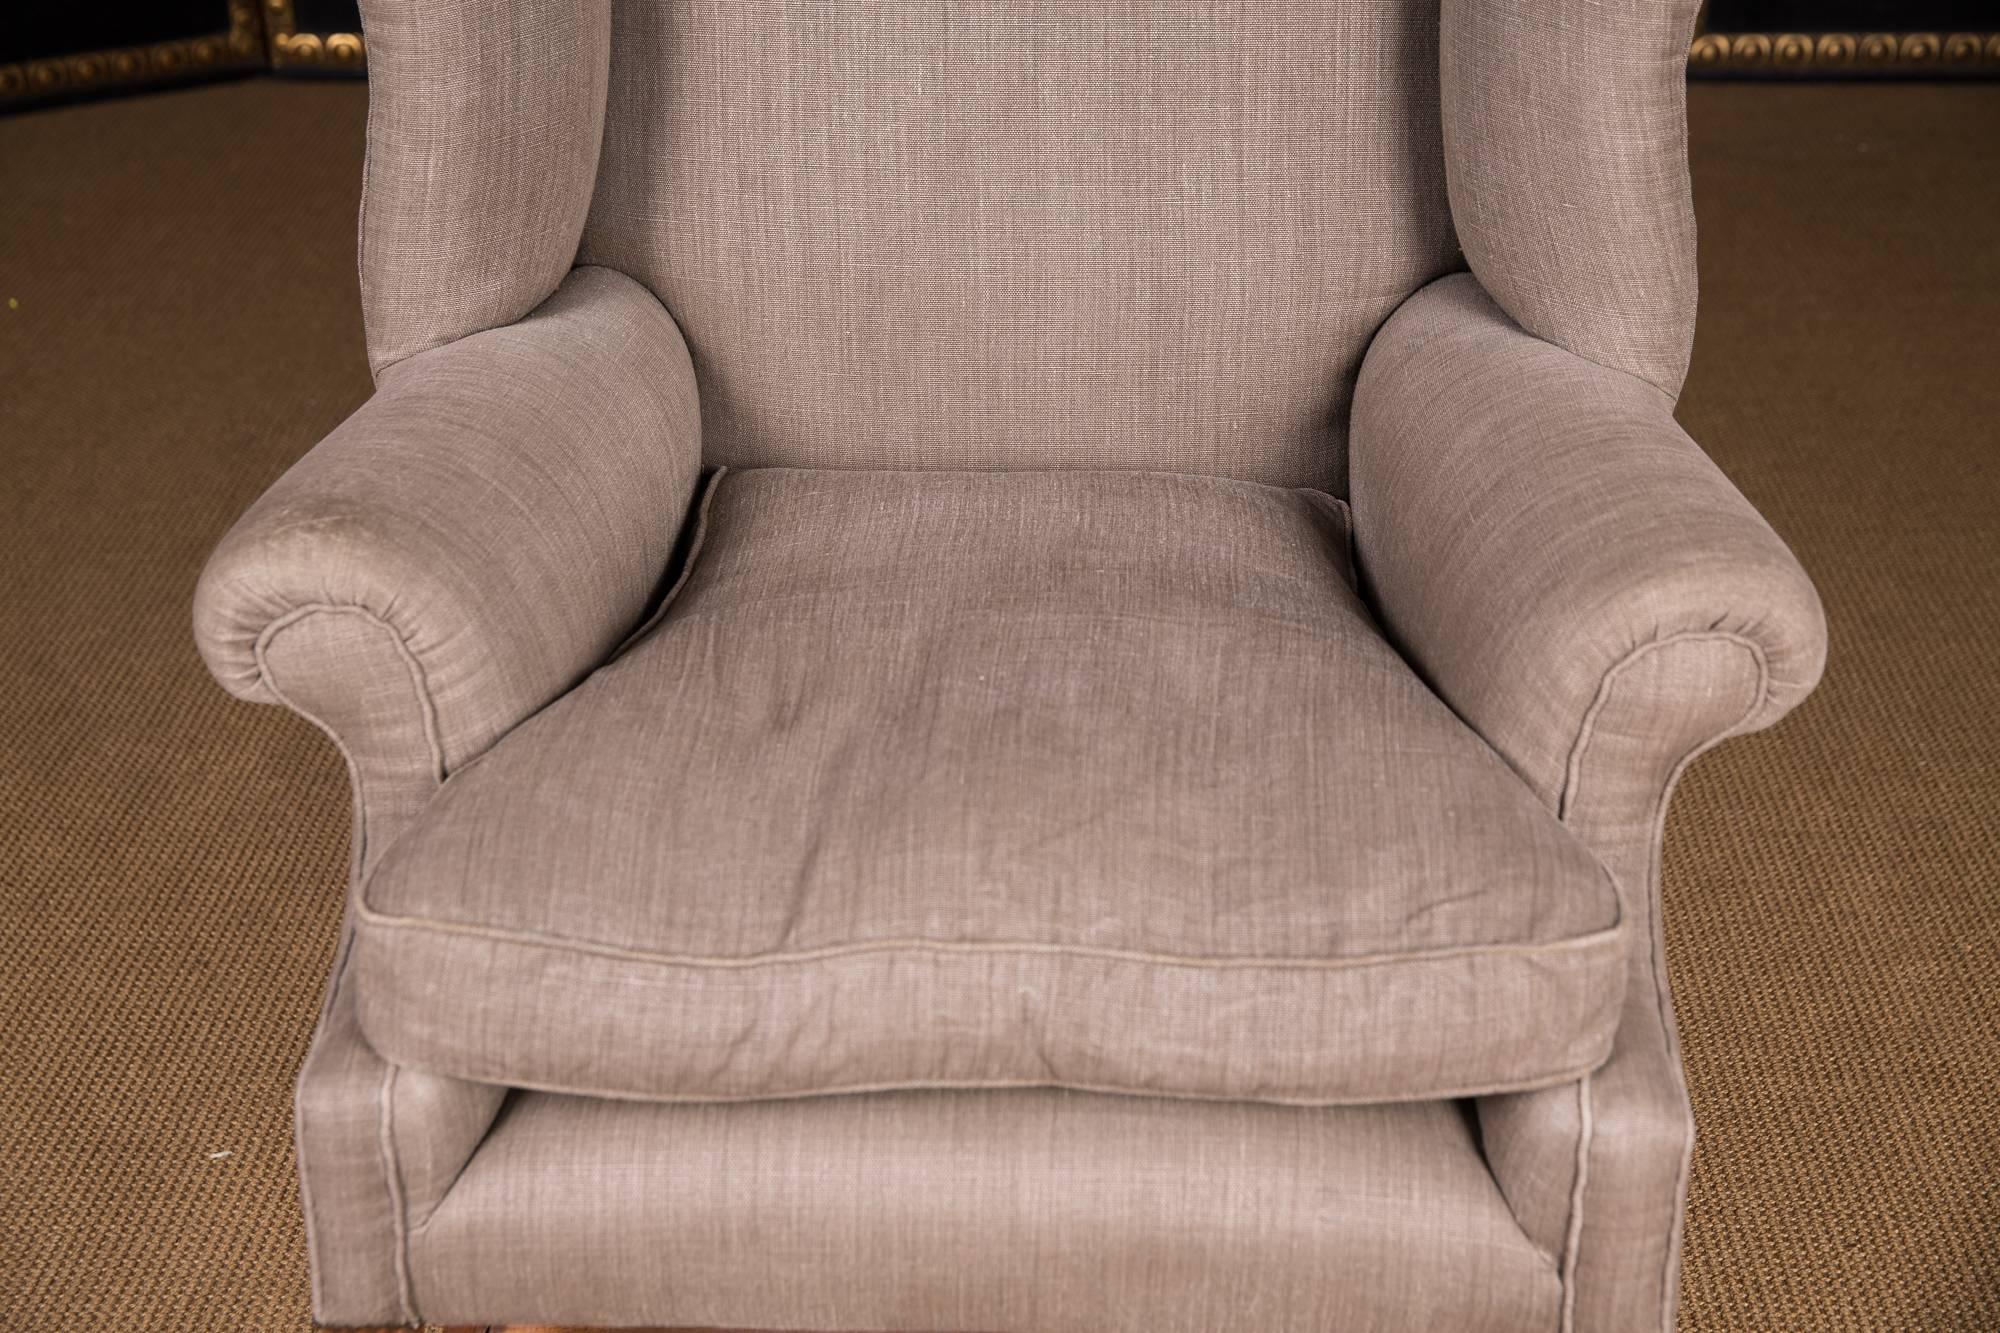 20th Century Original English Chesterfield Armchair with High Quality Linen Fabric